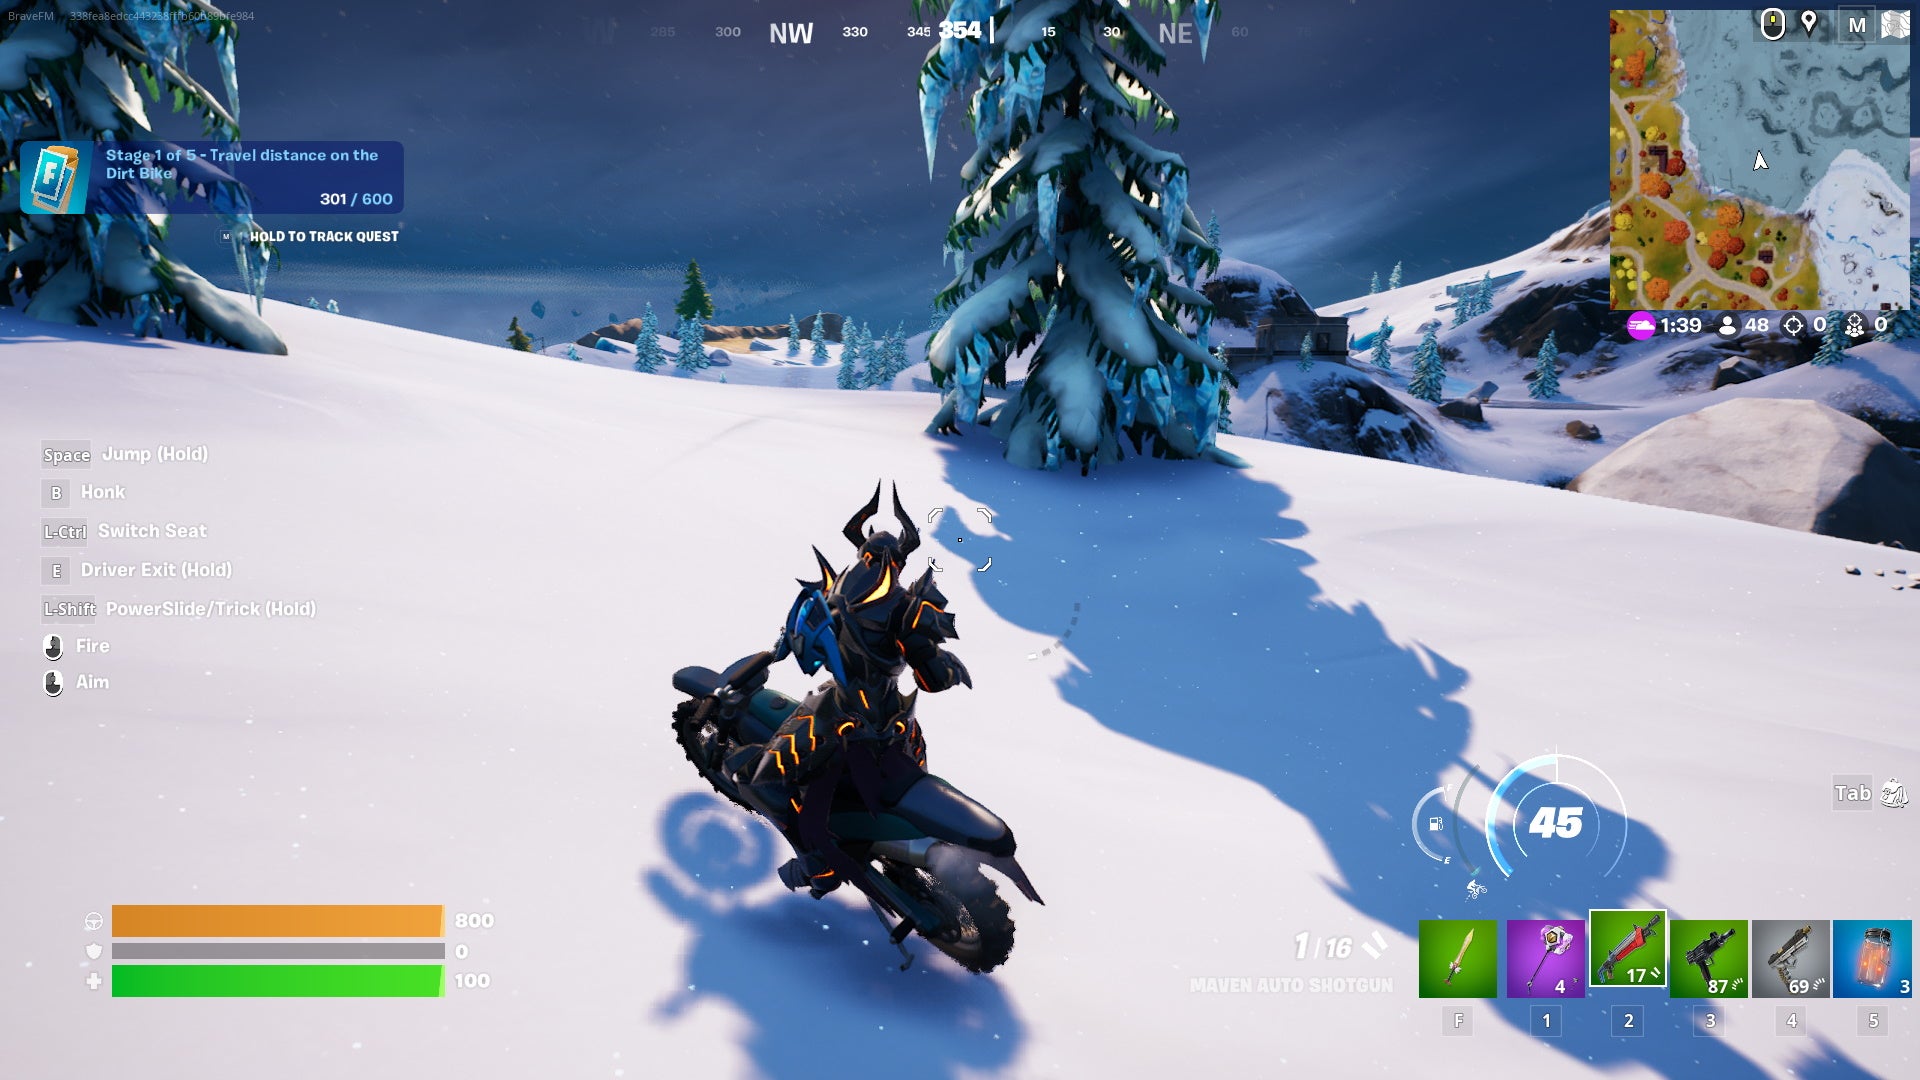 Fortnite dirt bike locations: An animated character in spiky black armor is riding a motorcycle across a snowy hill. He is aiming a shotgun at a tree.